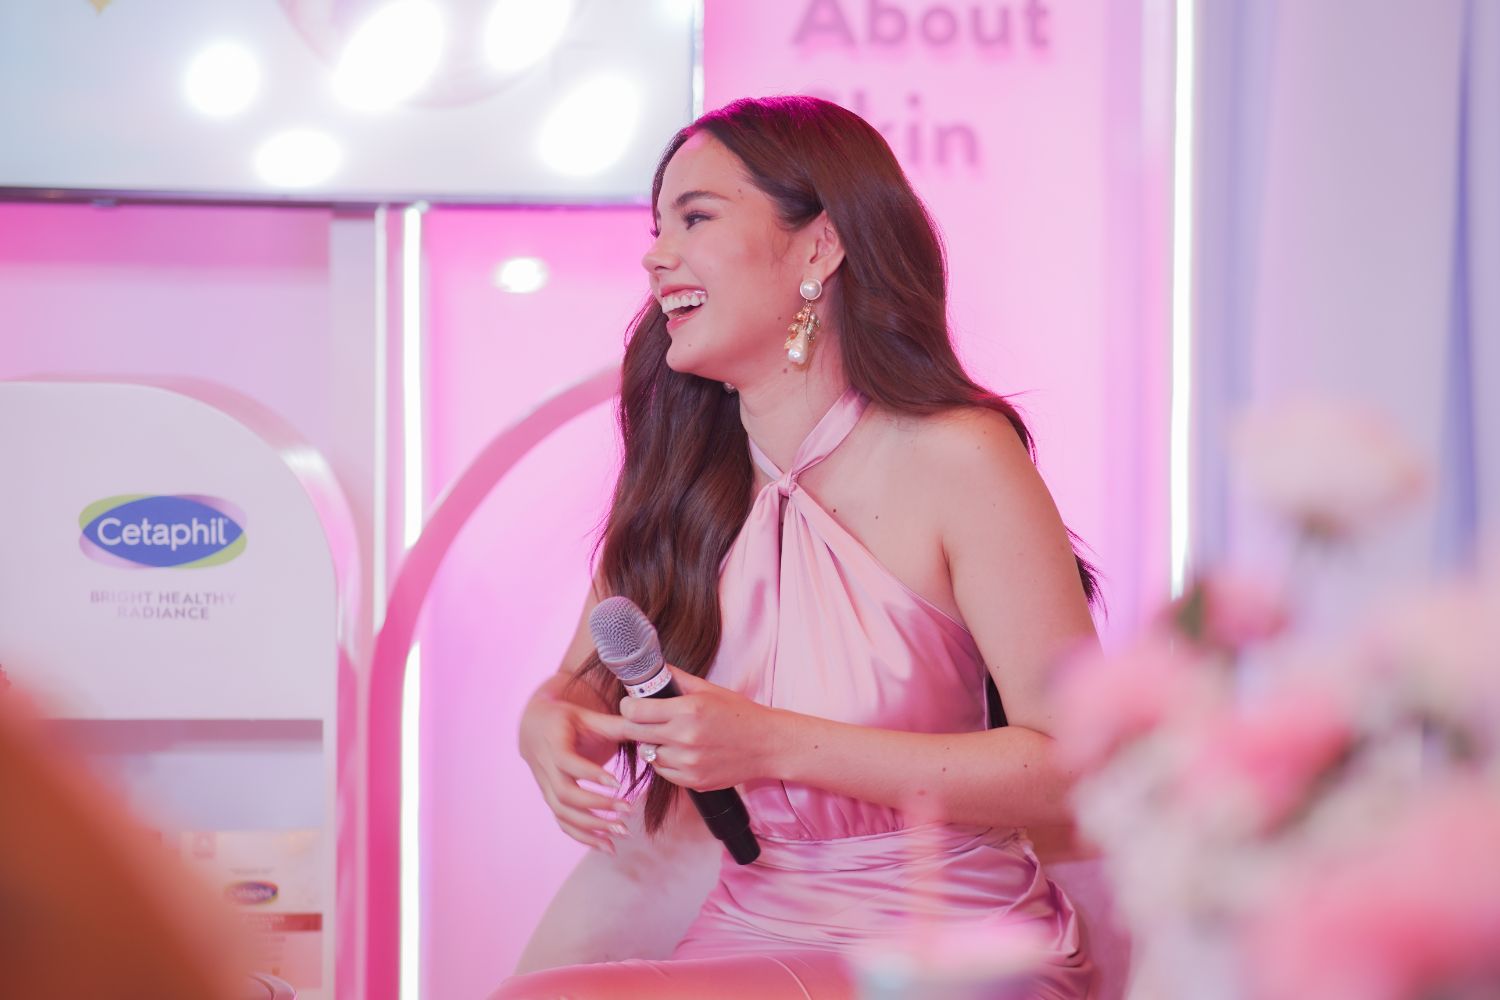 A Conversation on Overcoming Challenges and Gaining Confidence with Catriona Gray